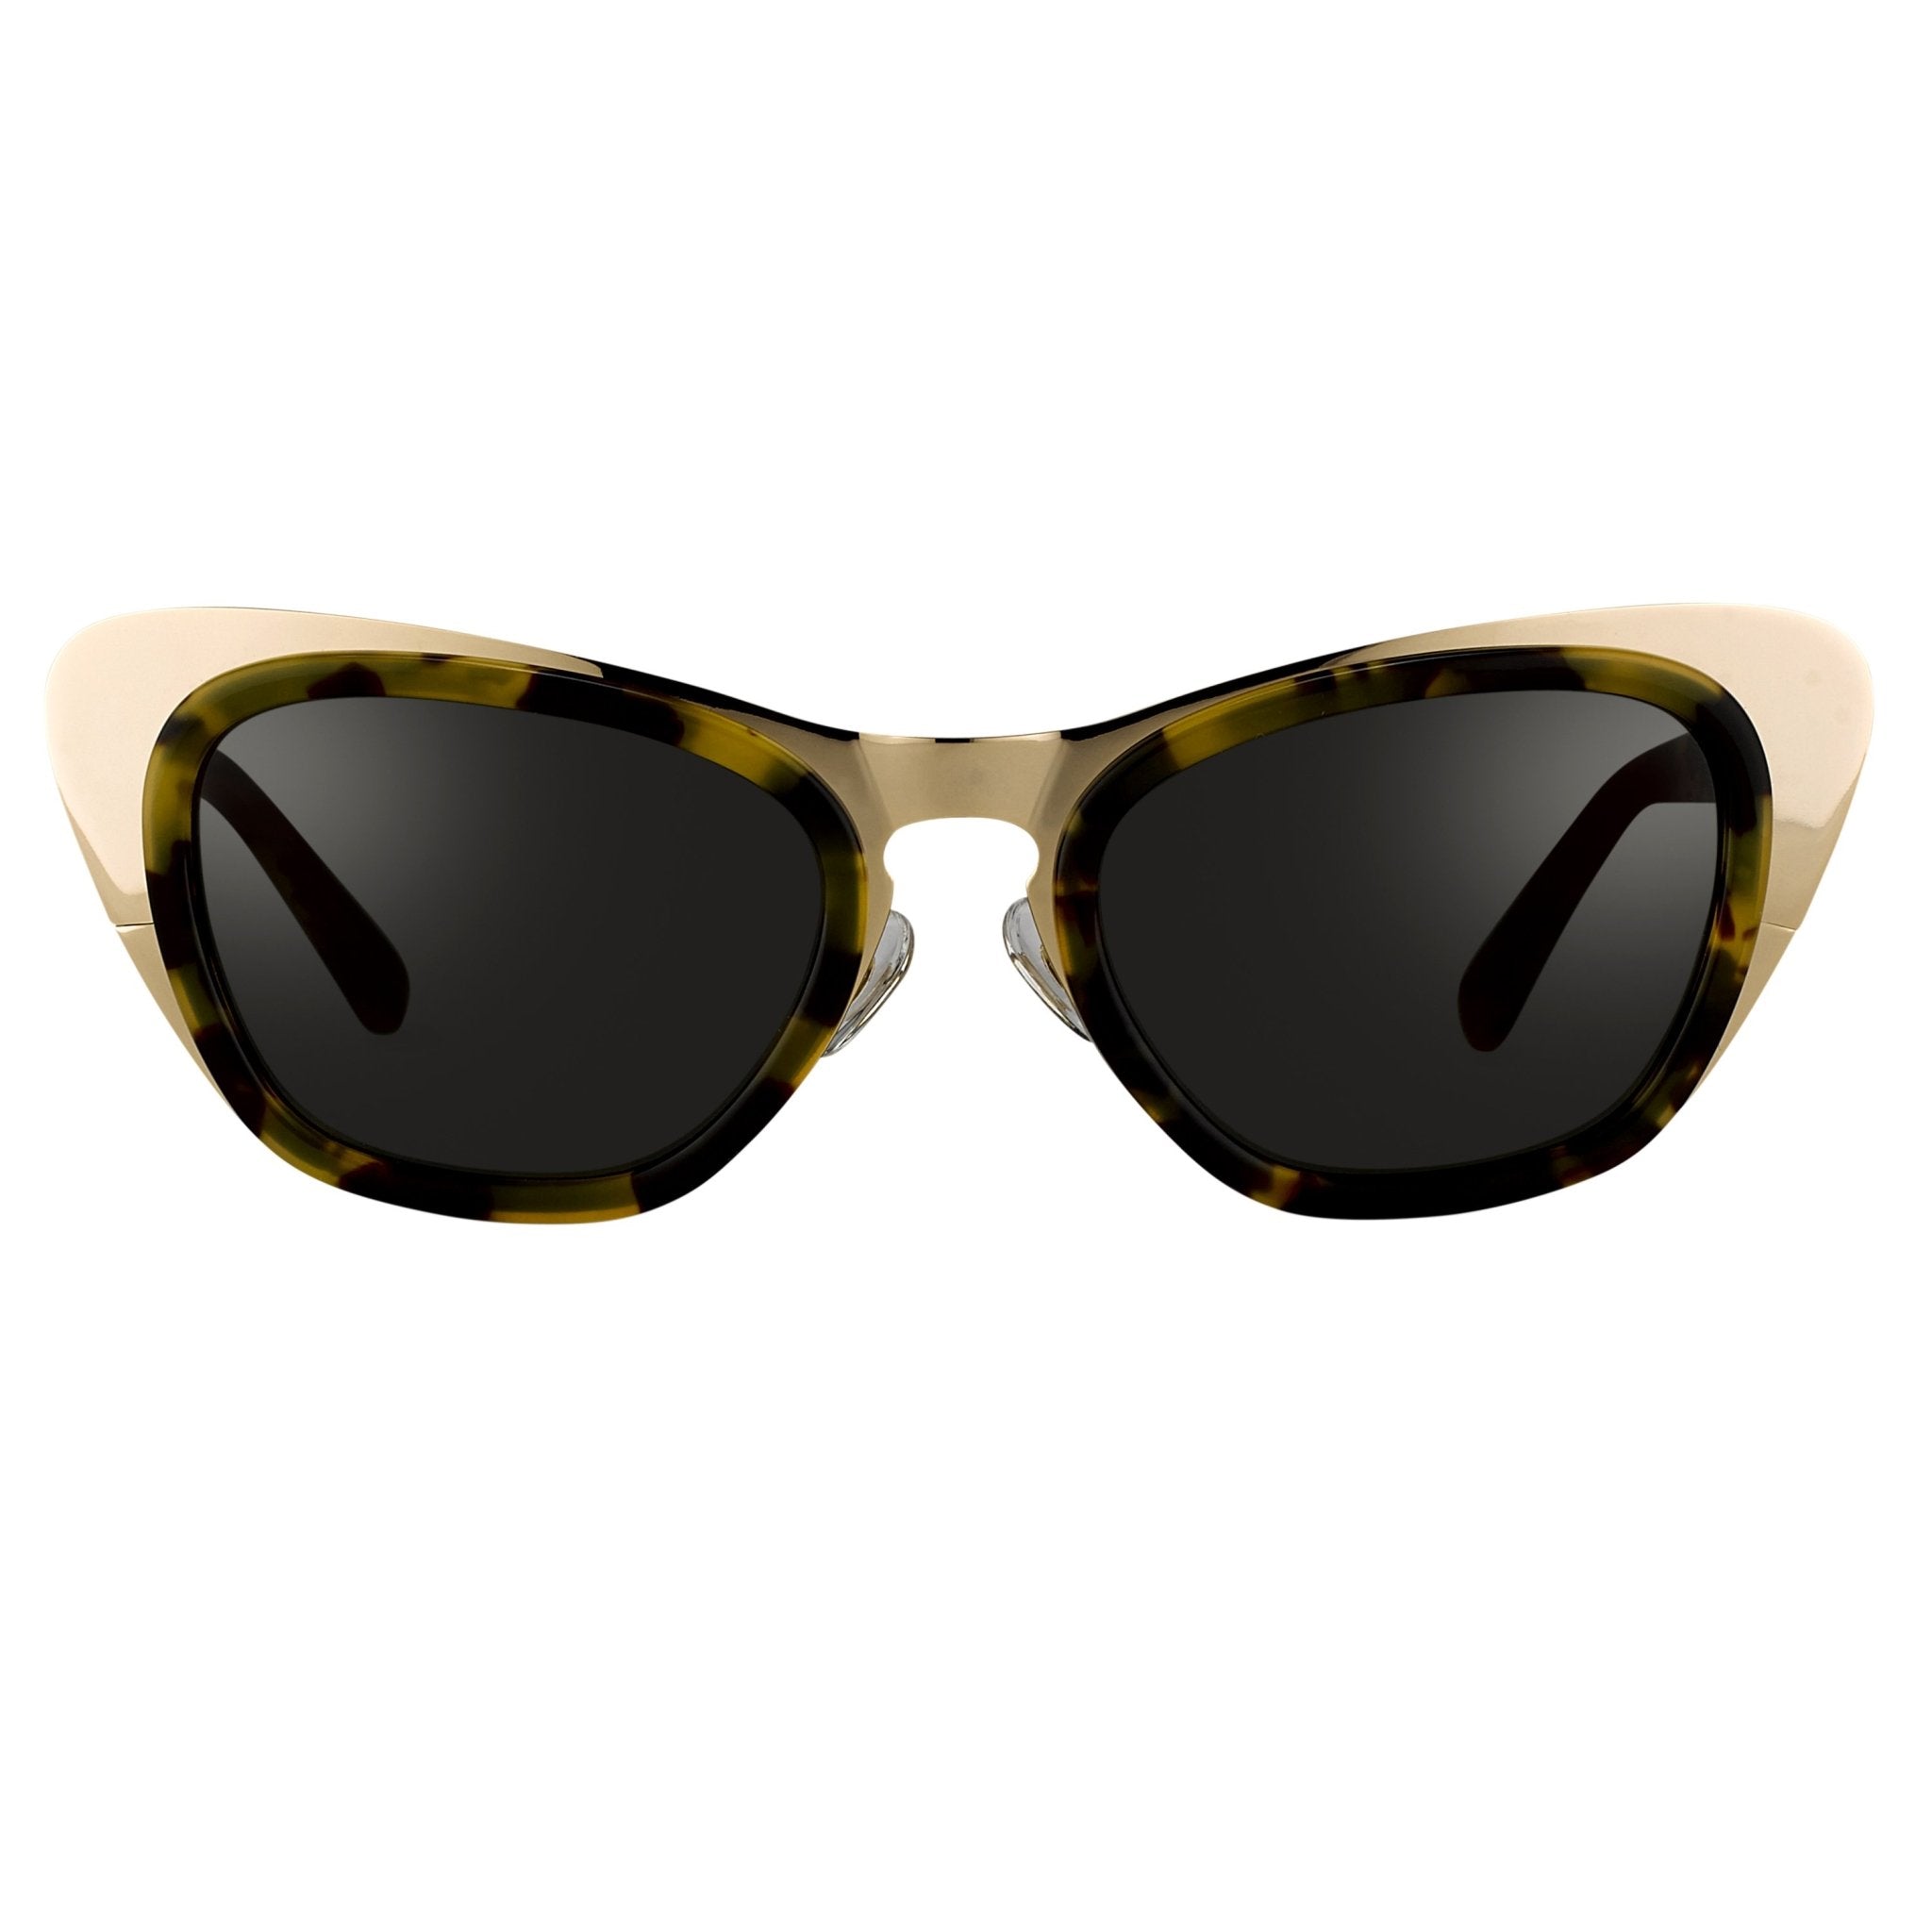 Erdem Women Sunglasses Cat Eye Tortoise Shell Gold with Grey Lenses Category 3 EDM17C2SUN - Watches & Crystals